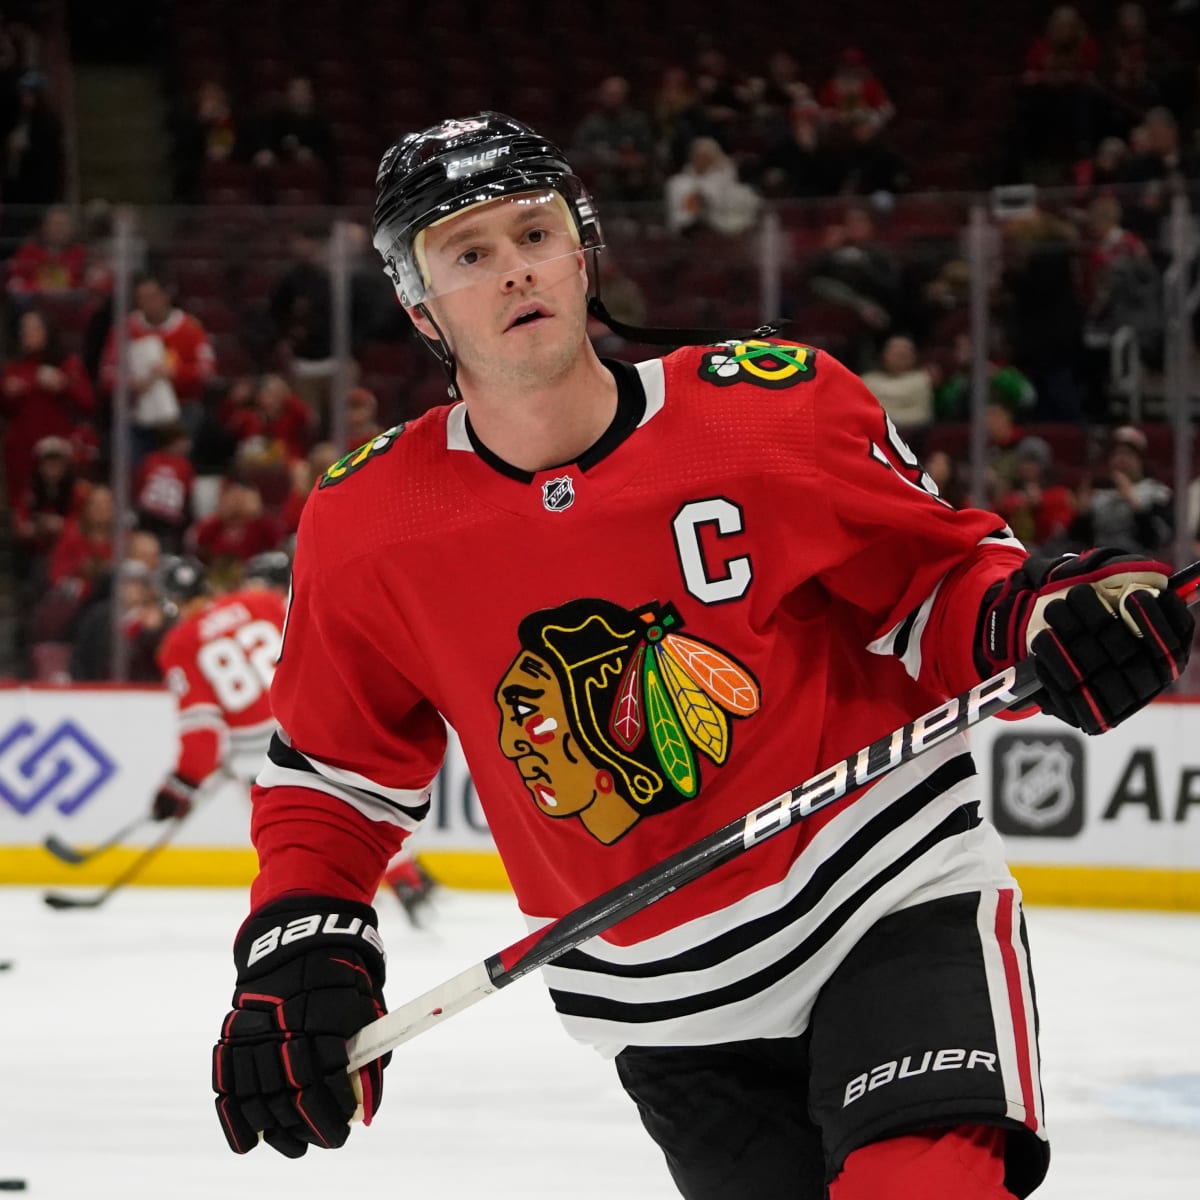 4 best free agent destinations for Jonathan Toews